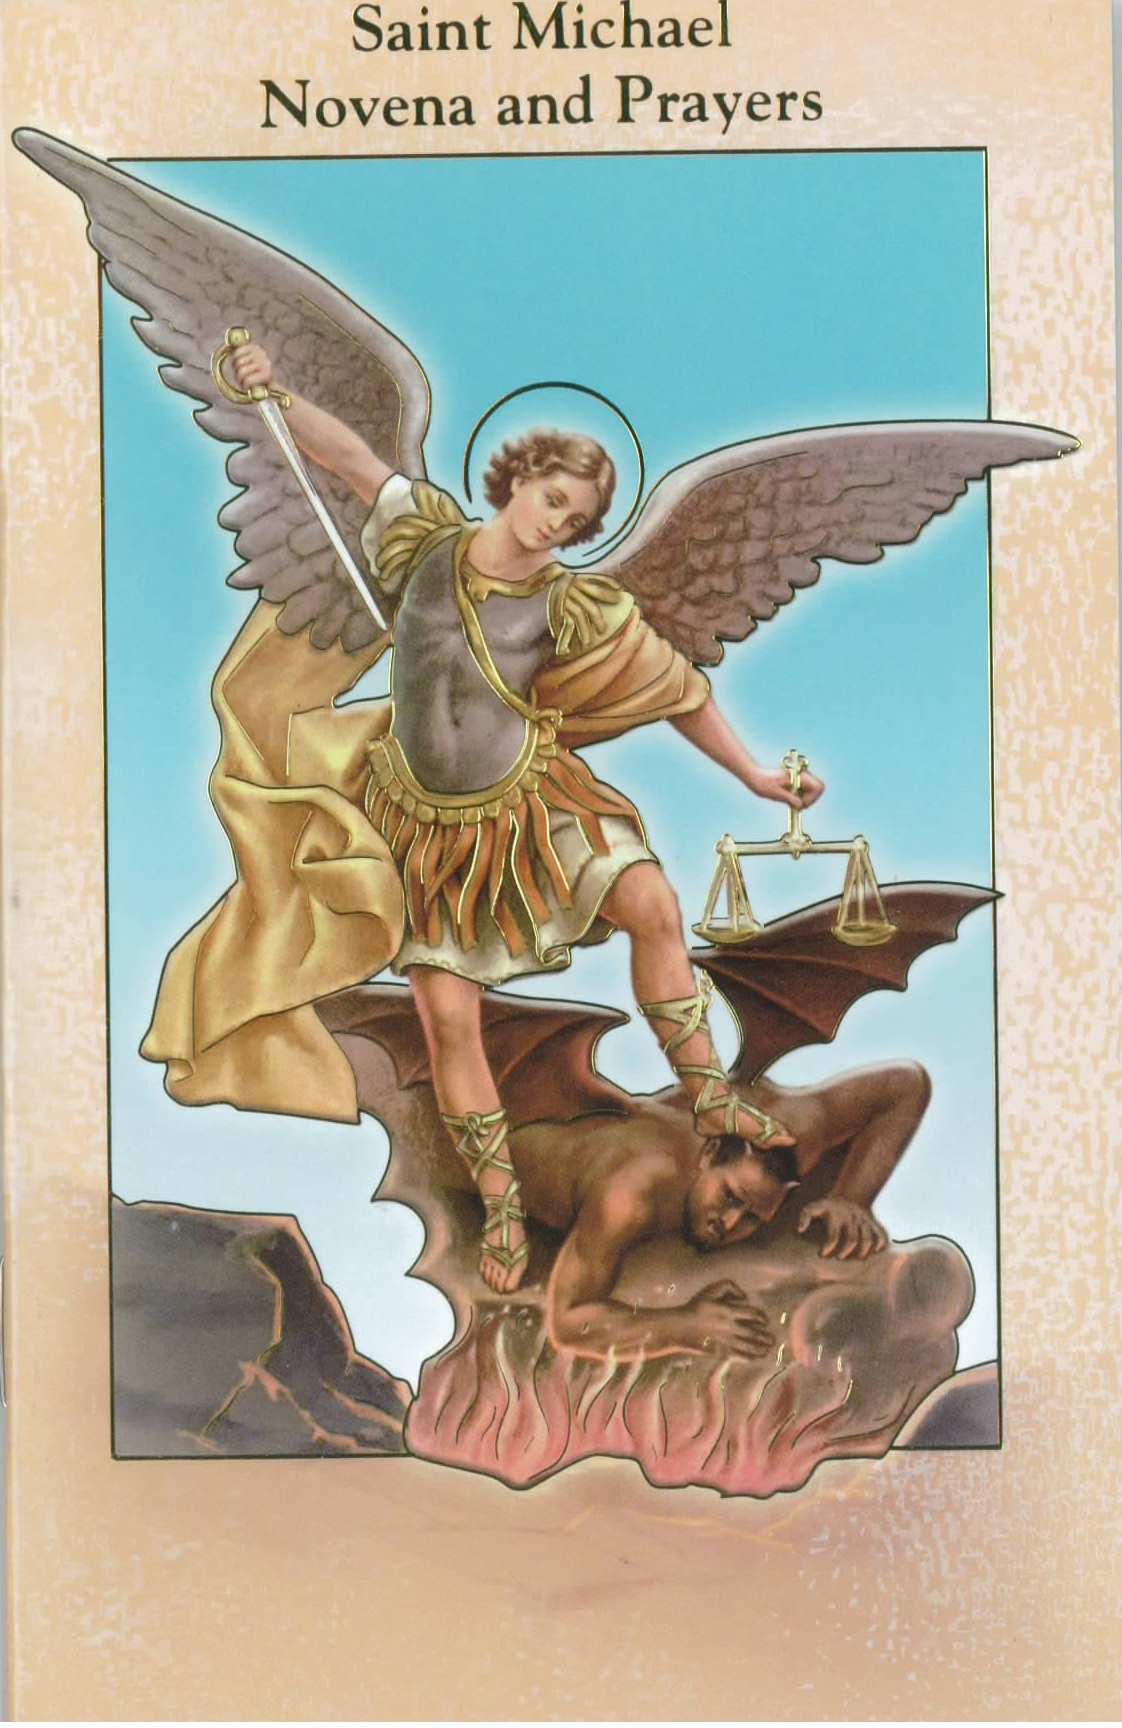 Saint Michael Novena and Prayers Book 12-2432-330 is 3.75" x 5-7/8" and 24 pages beautifully illustrated with Italian Fratelli-Bonella Artwork and original novena text by Rev. John J. Kiernan P.R.